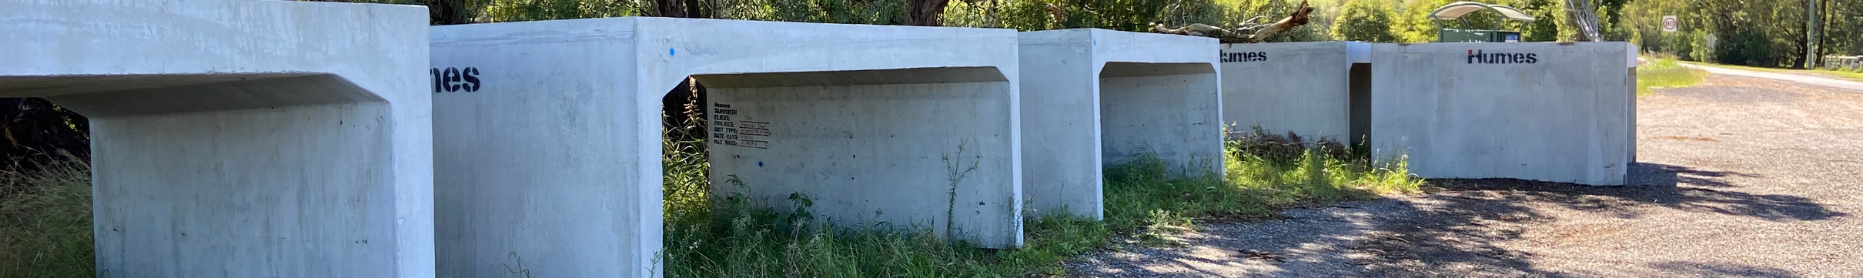 Five concrete culverts awaiting installation as part of major roads upgrades. 